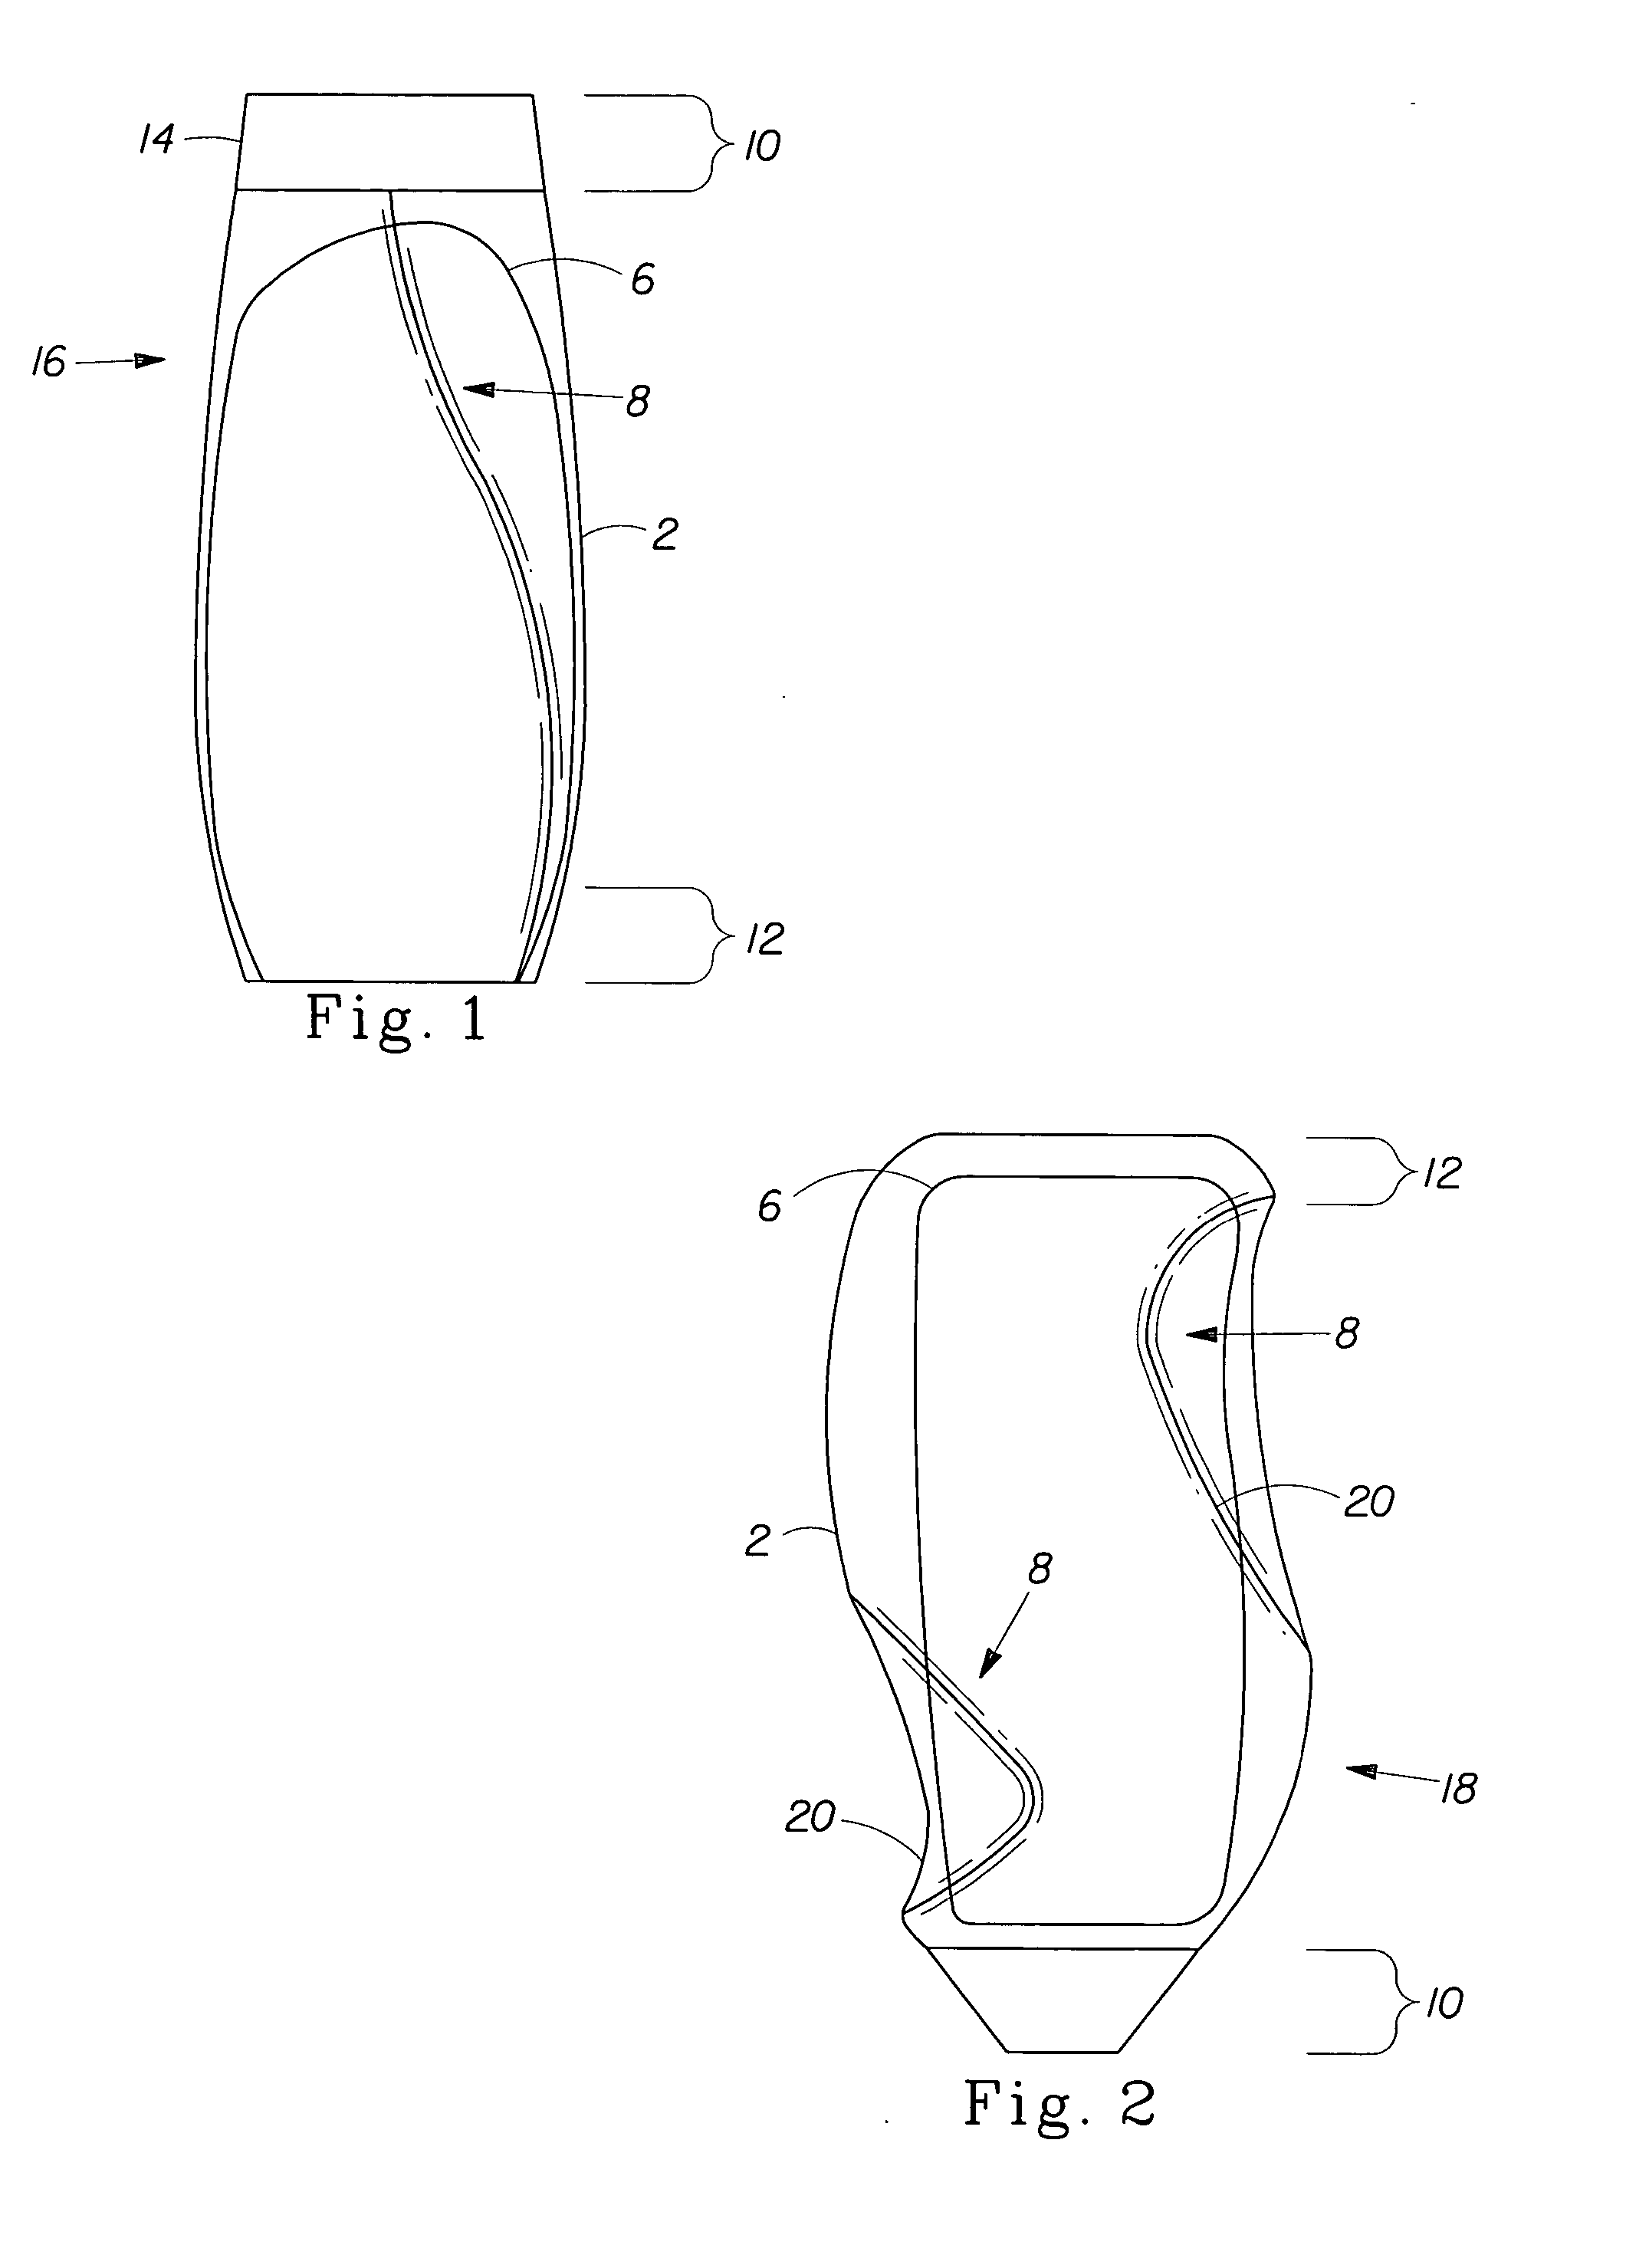 Container comprising an in-mold label positioned proximate to a surface topography